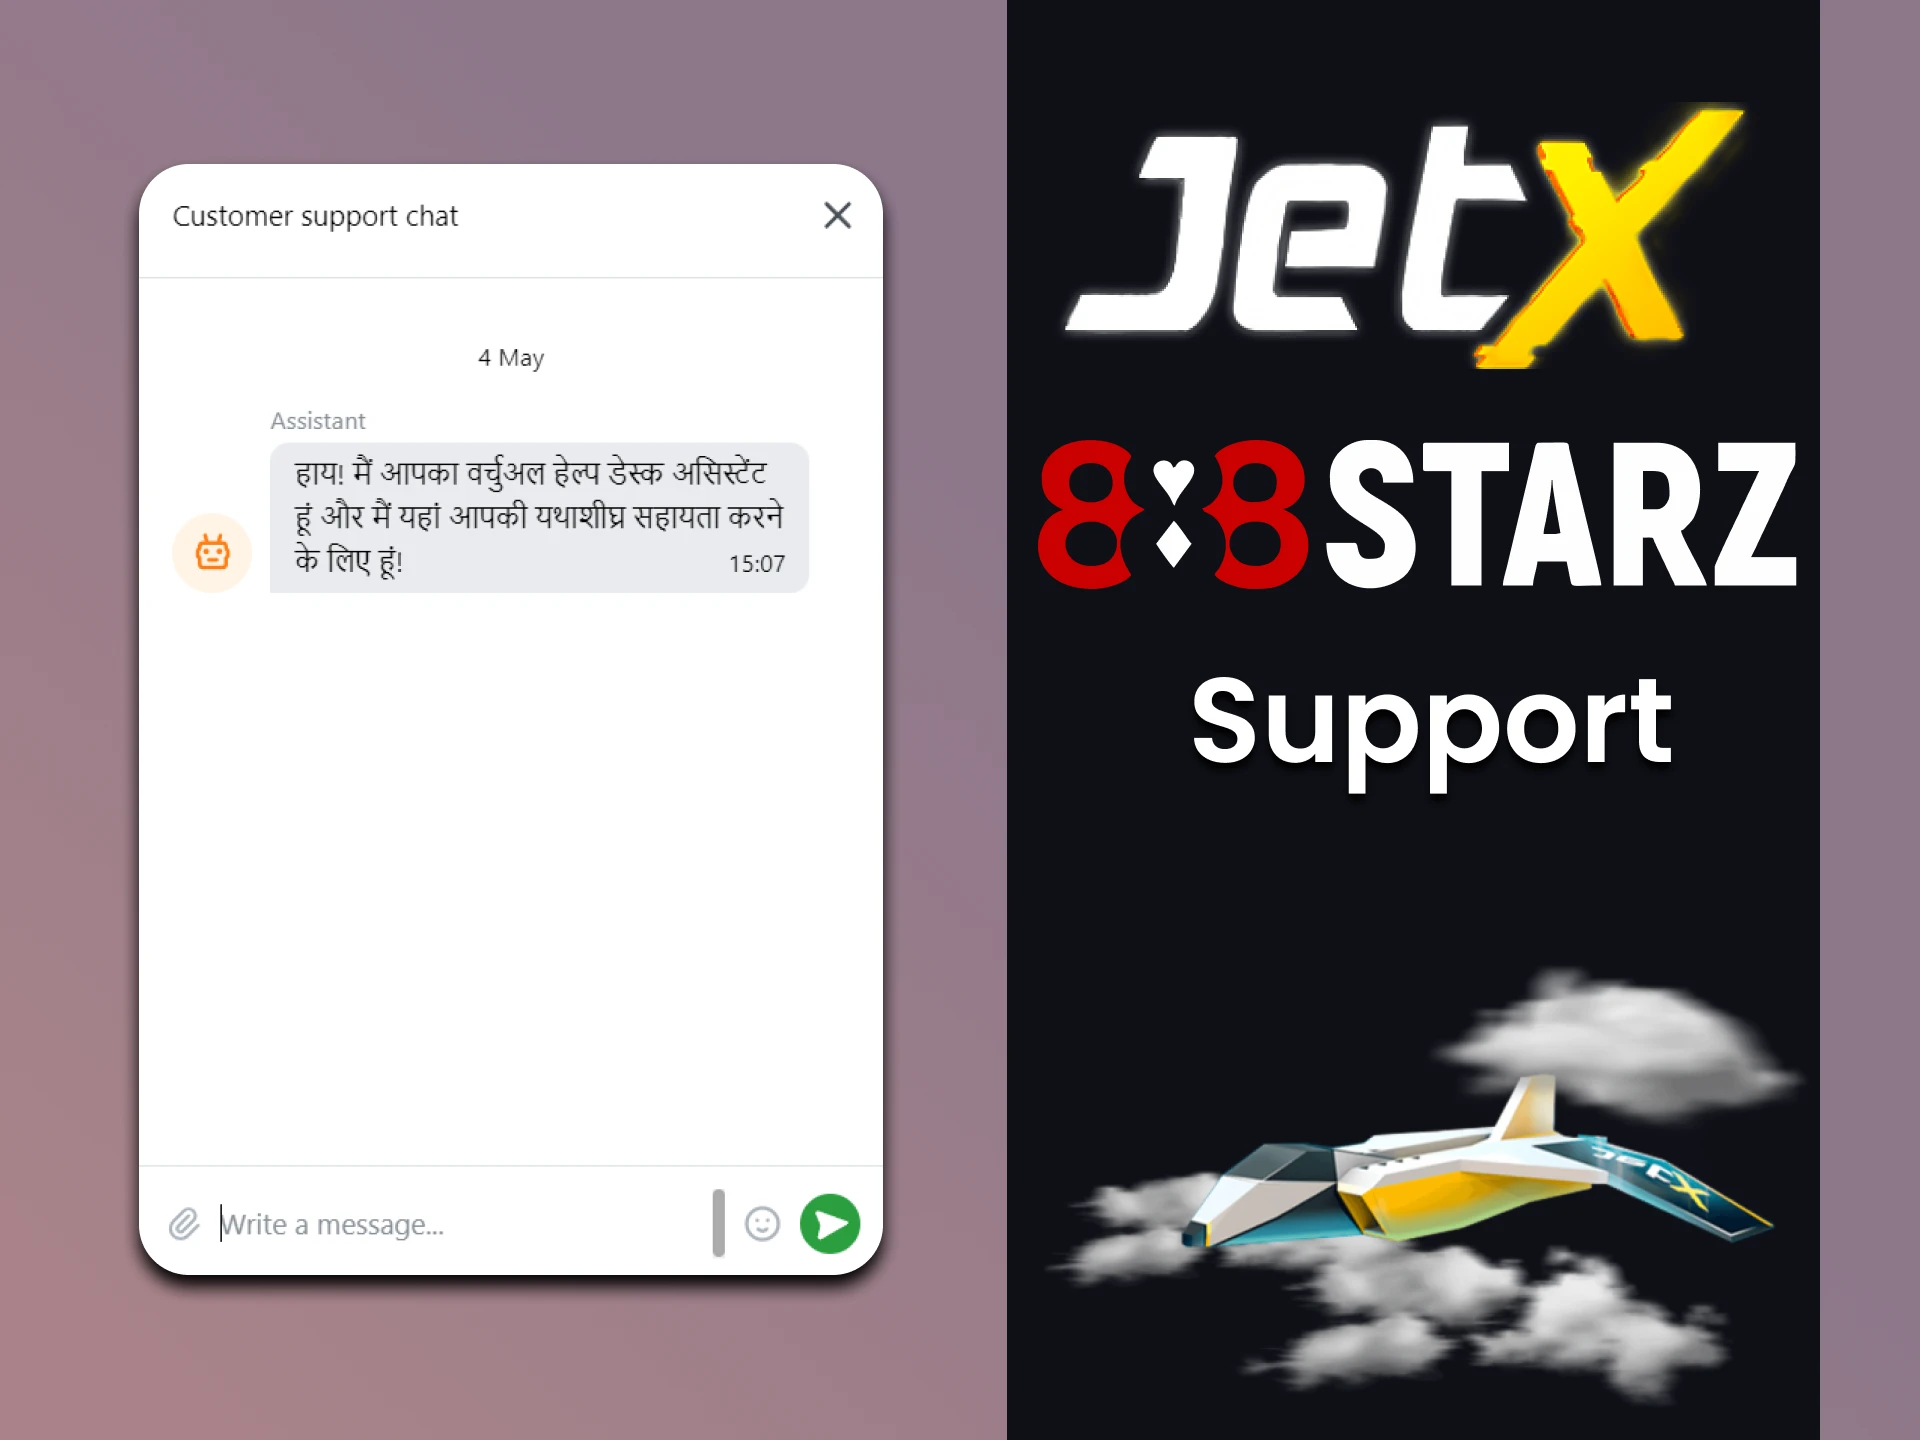 You can always contact 888starz support with questions about the JetX game.